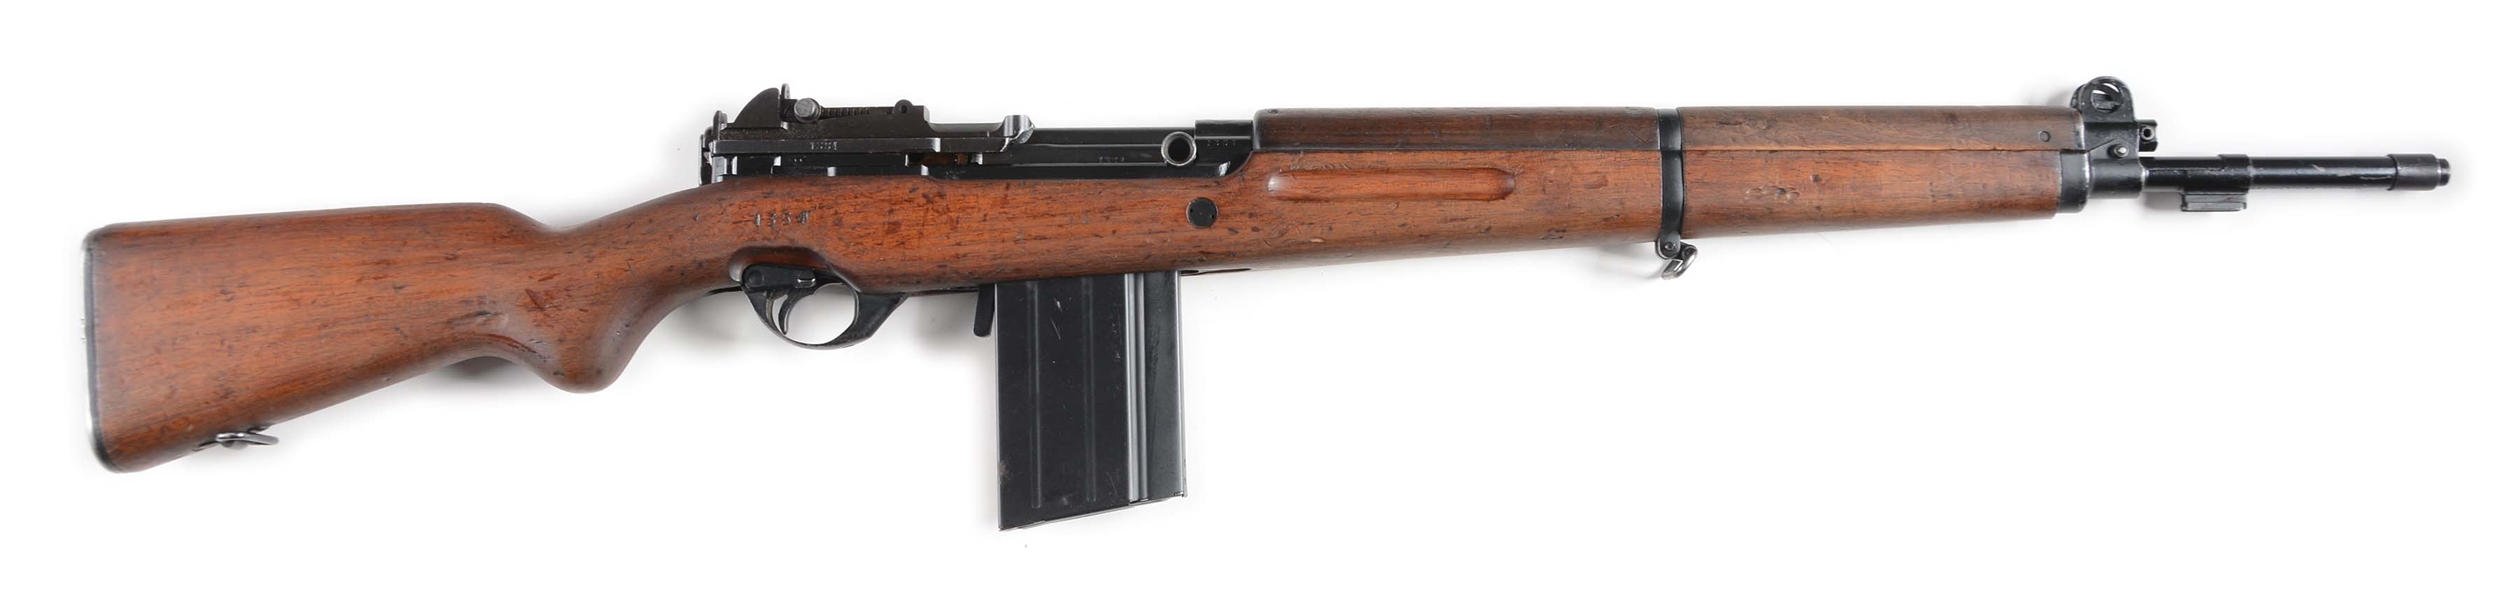 (C) FN-49 ARGENTINE NAVY SEMI-AUTOMATIC RIFLE.